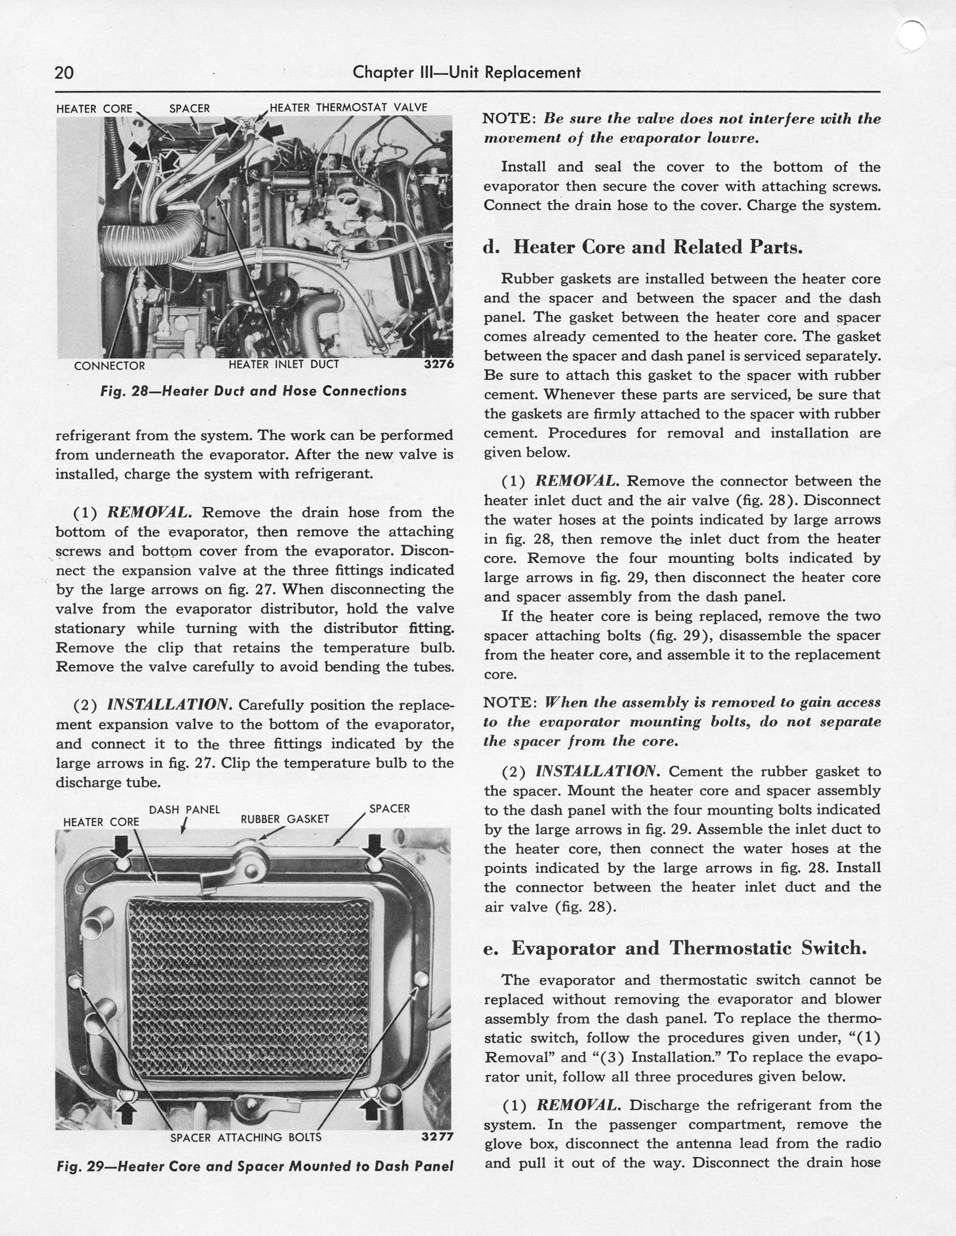 1955 Ford Car Air Conditioning Shop Manual Page 20 - "SelectAire Conditioner"